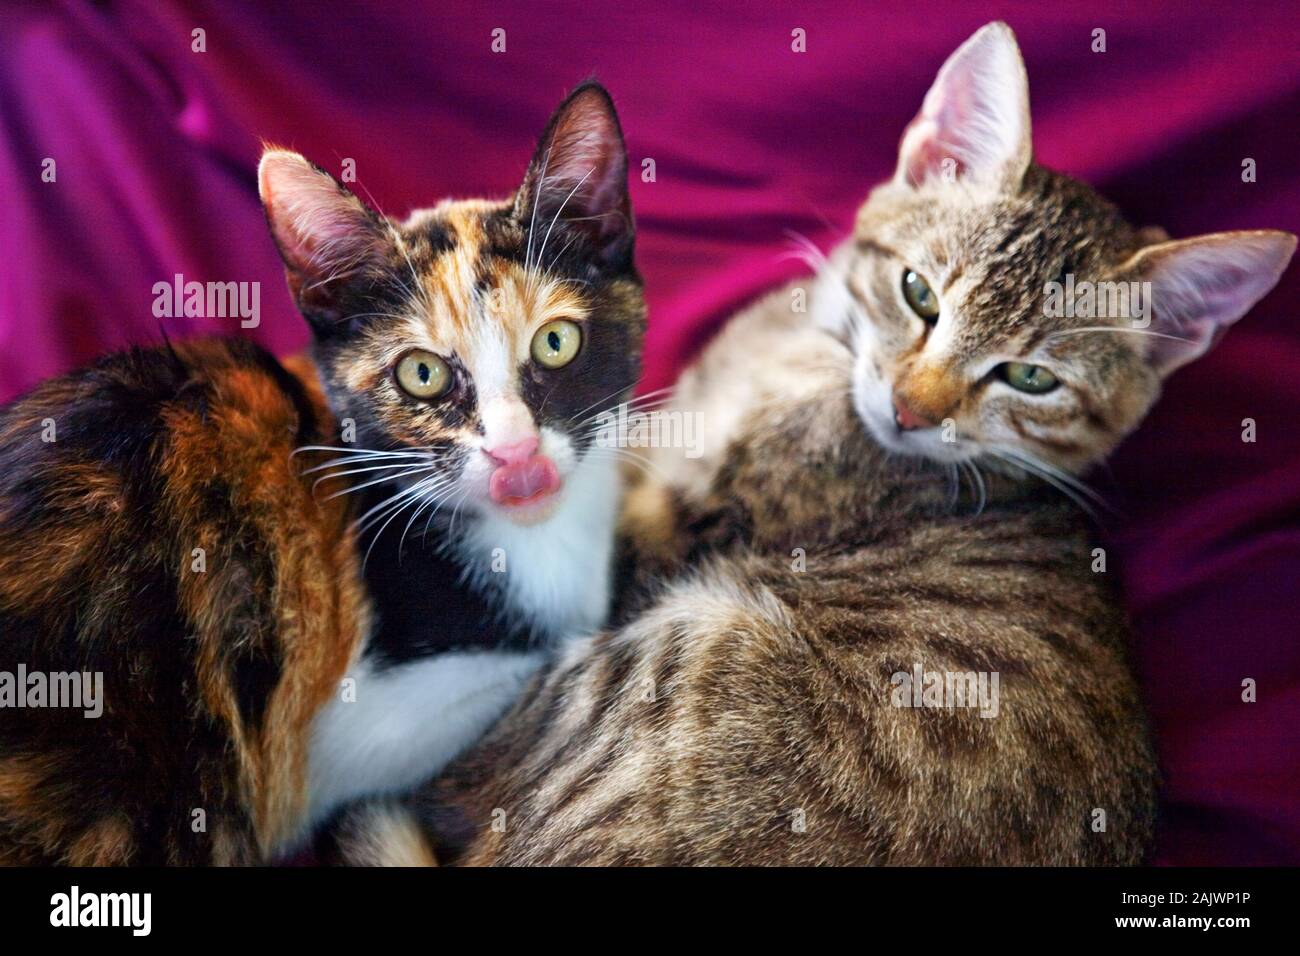 Tortoiseshell Cats High Resolution Stock Photography And Images Alamy,Toffee Recipe